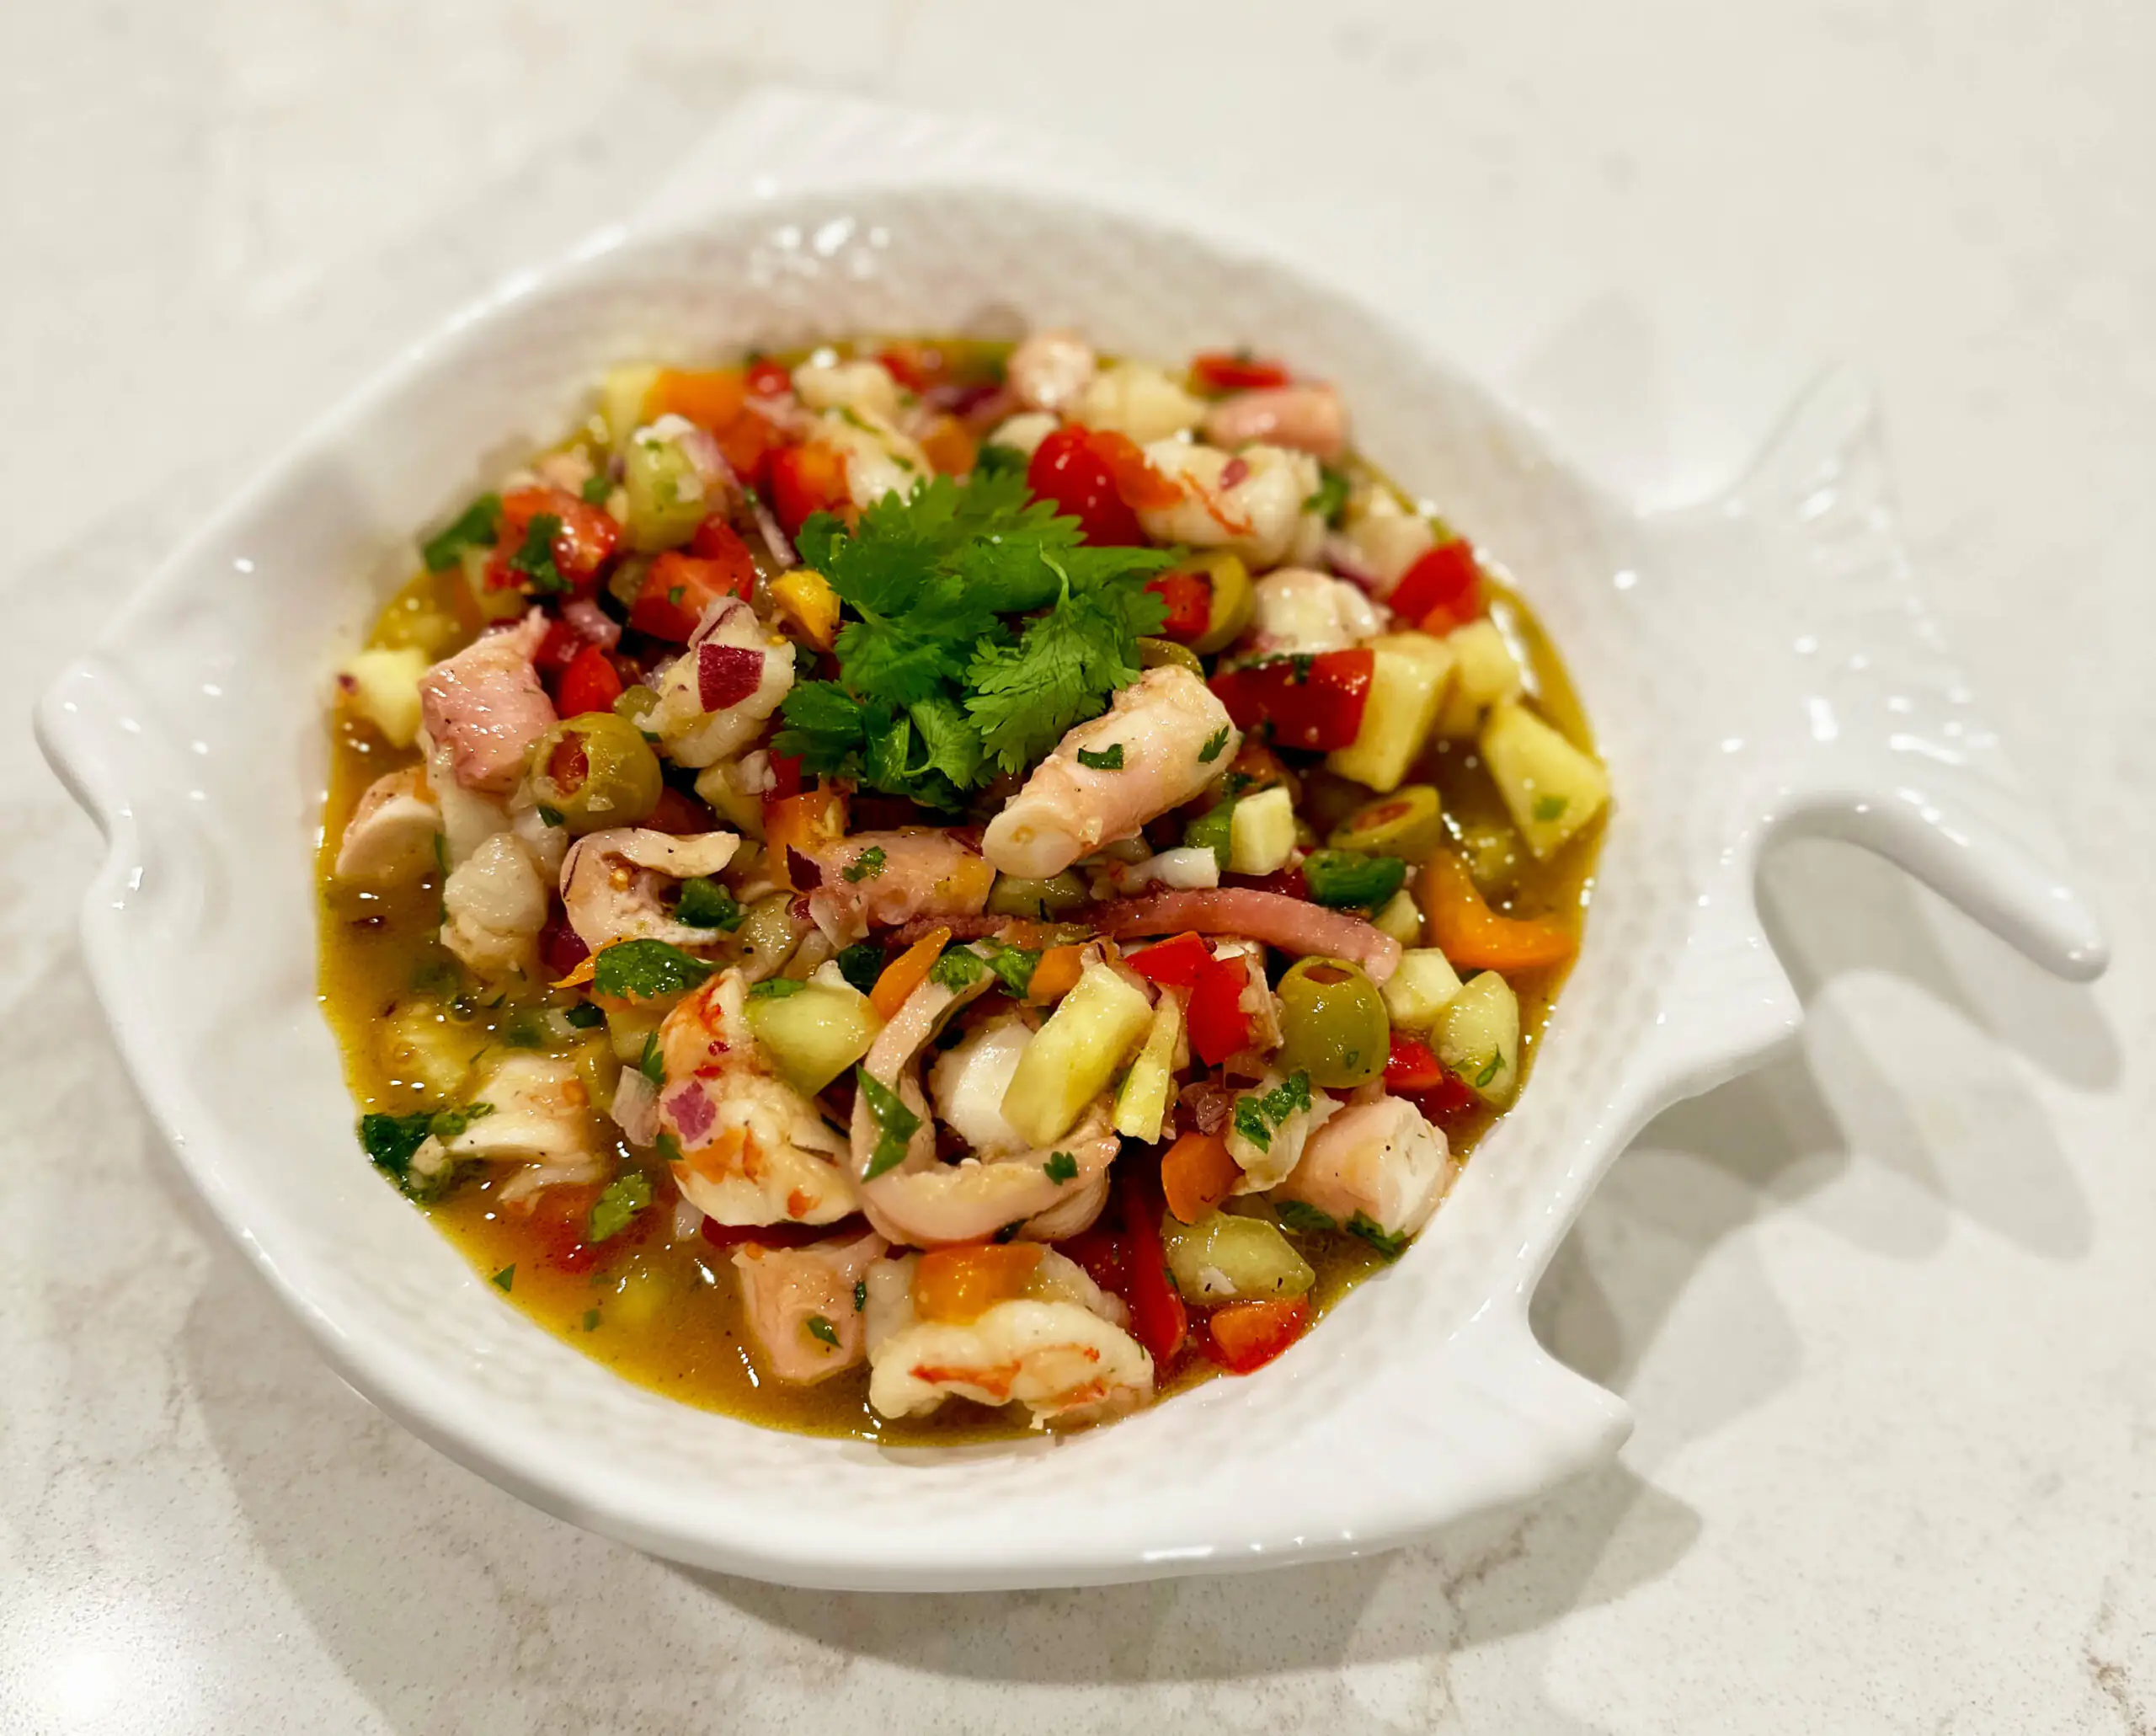 Nutritious dish of octopus and shrimp ceviche